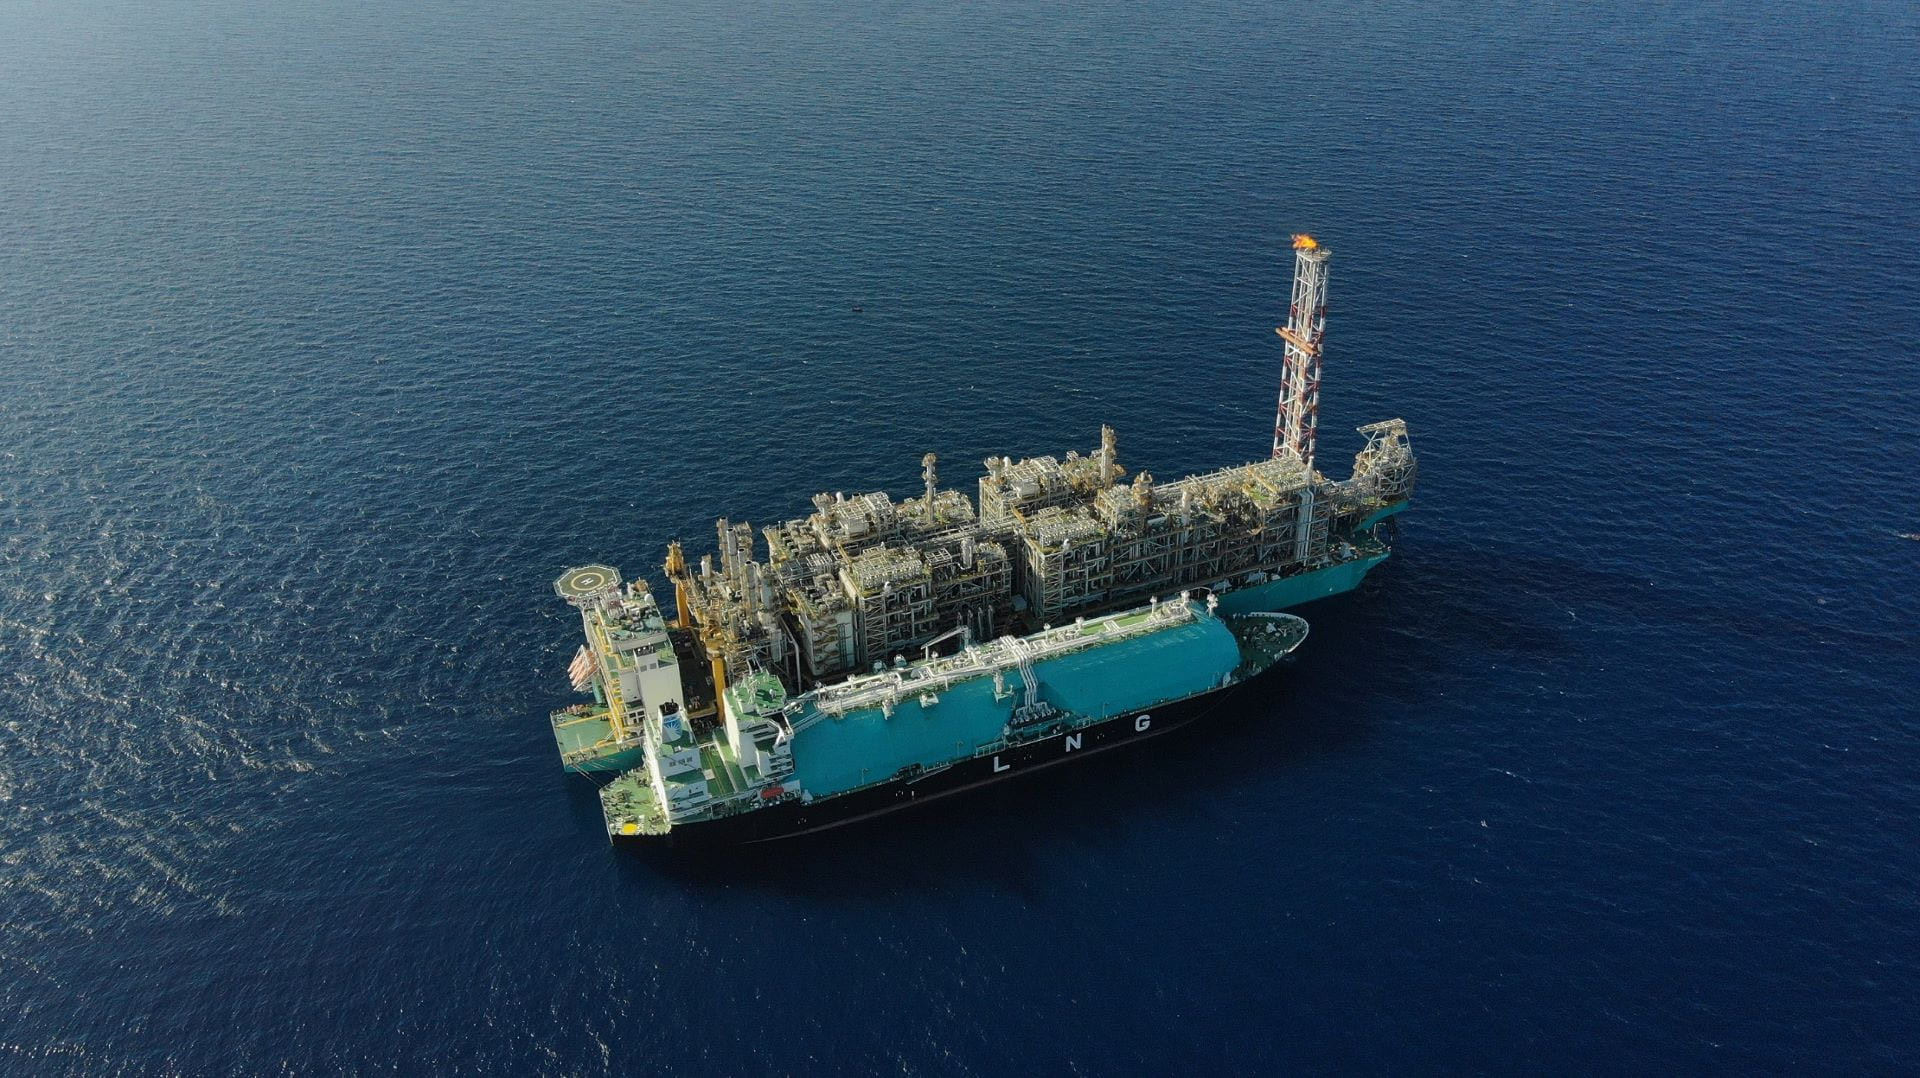 Malaysia’s Petronas boosts LNG sales in Q1